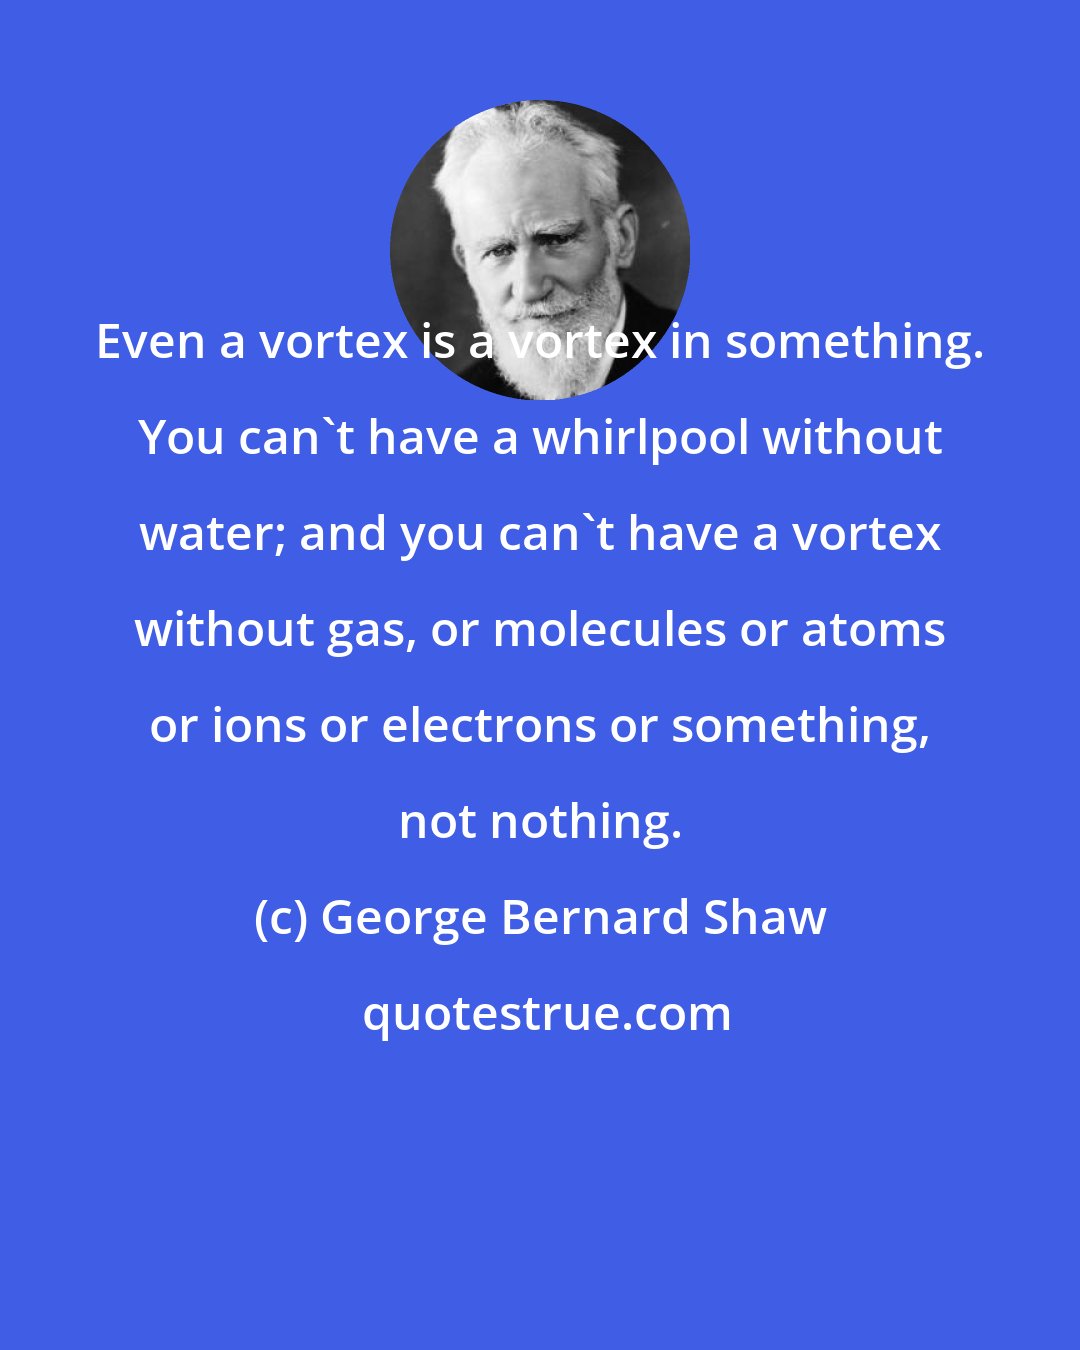 George Bernard Shaw: Even a vortex is a vortex in something. You can't have a whirlpool without water; and you can't have a vortex without gas, or molecules or atoms or ions or electrons or something, not nothing.